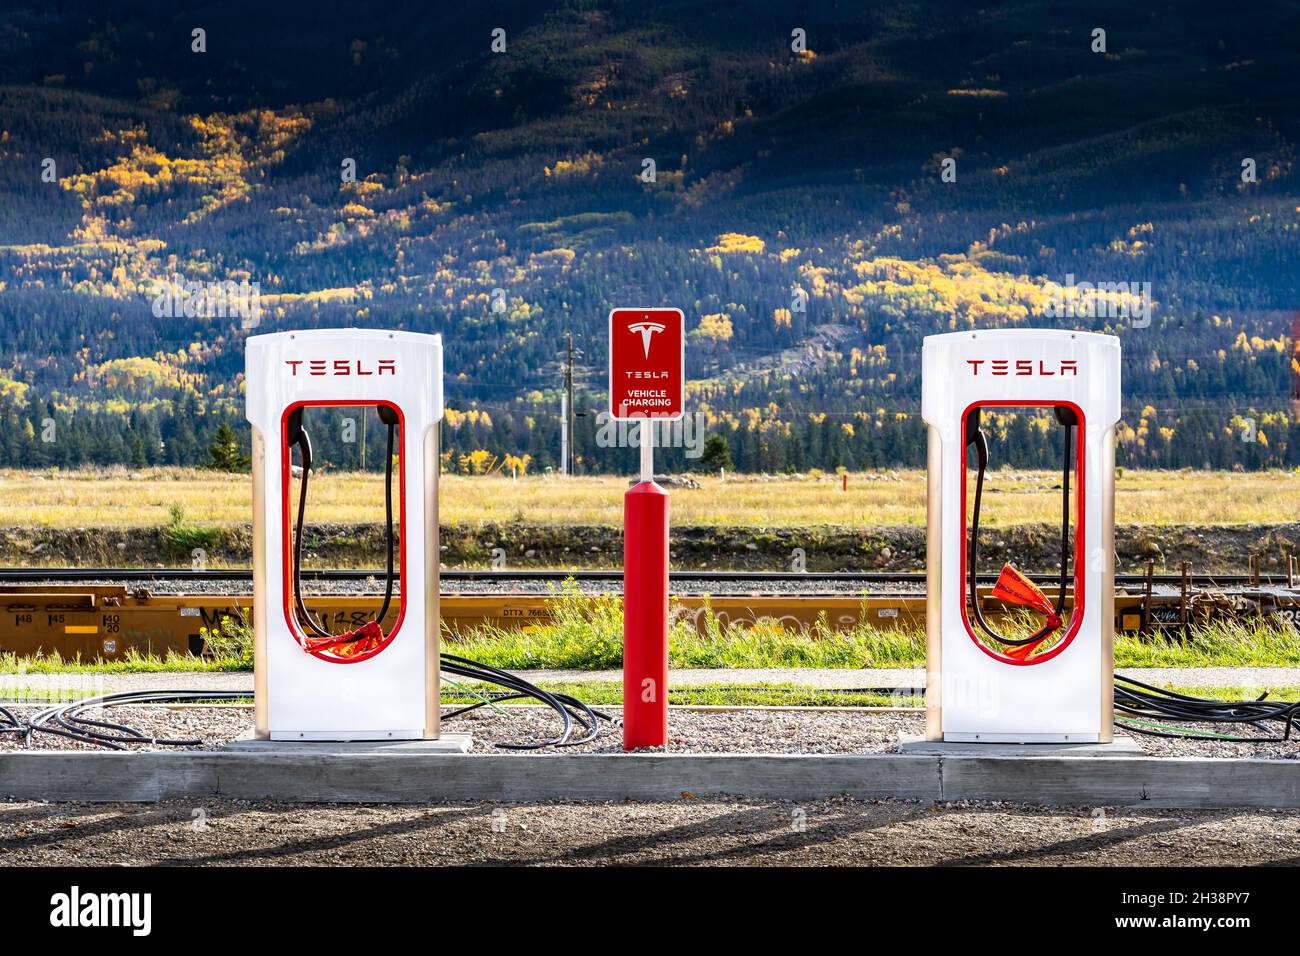 Jasper Alberta Canada, October 05 2021: Electric Car Charging Station being installed at a National Park in the Canadian Rockies. Stock Photo